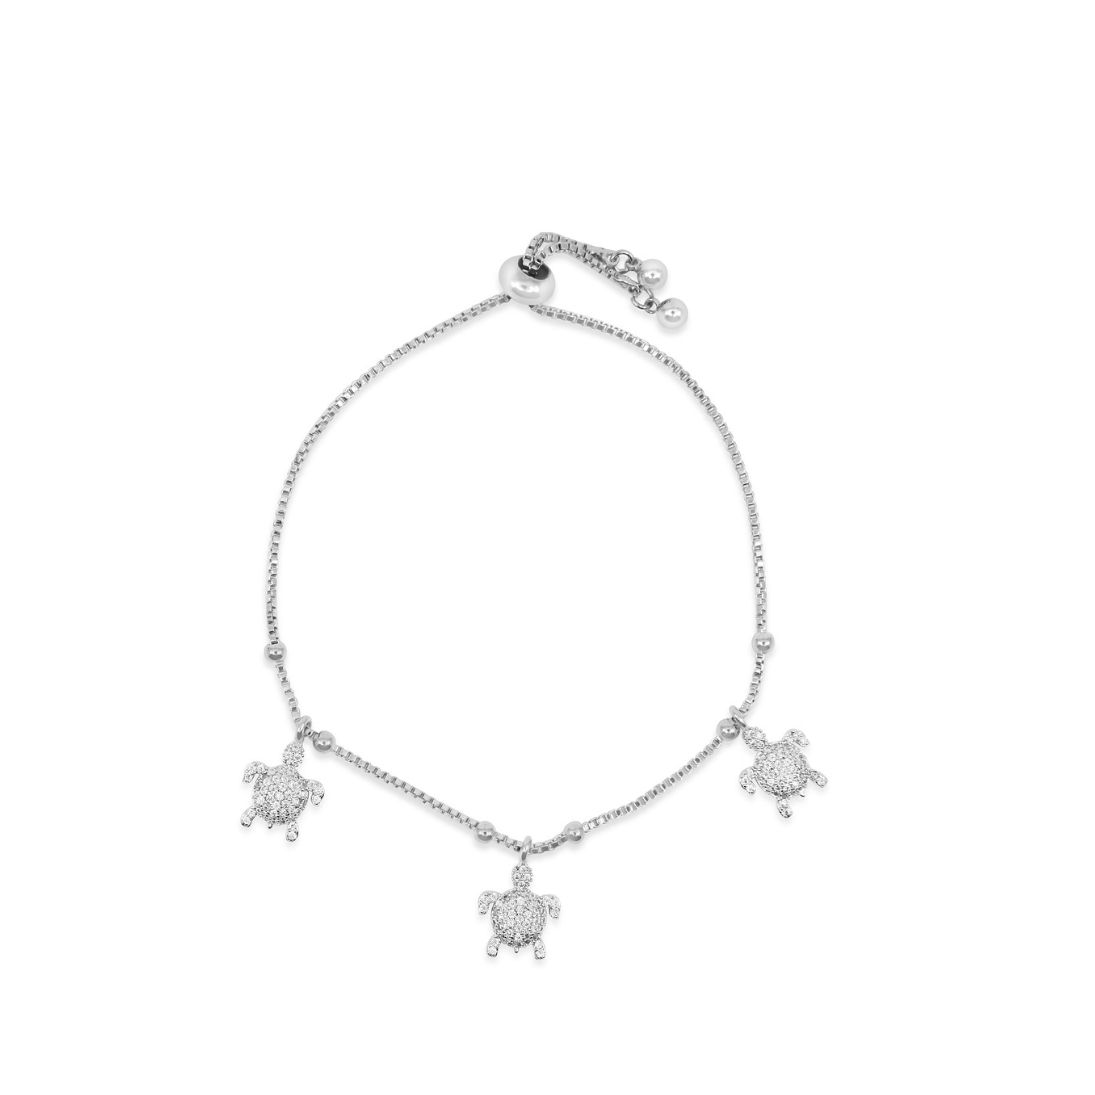 Amazing Luxurious Classic White Micro Pava Turtle Charm Bracelet Silver Filled High Polish Finsh